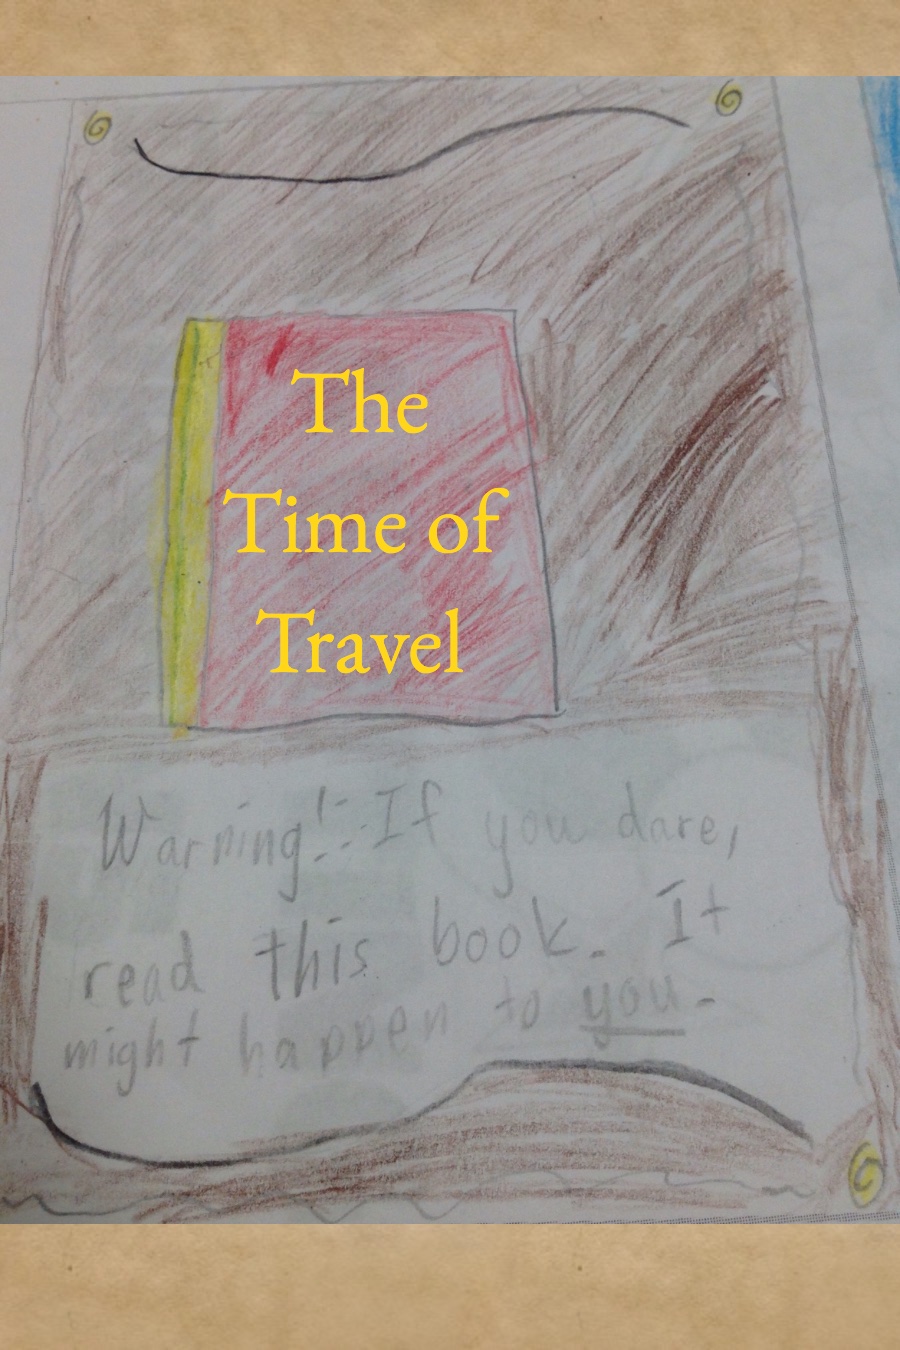 The Time of Travel by Tyler J